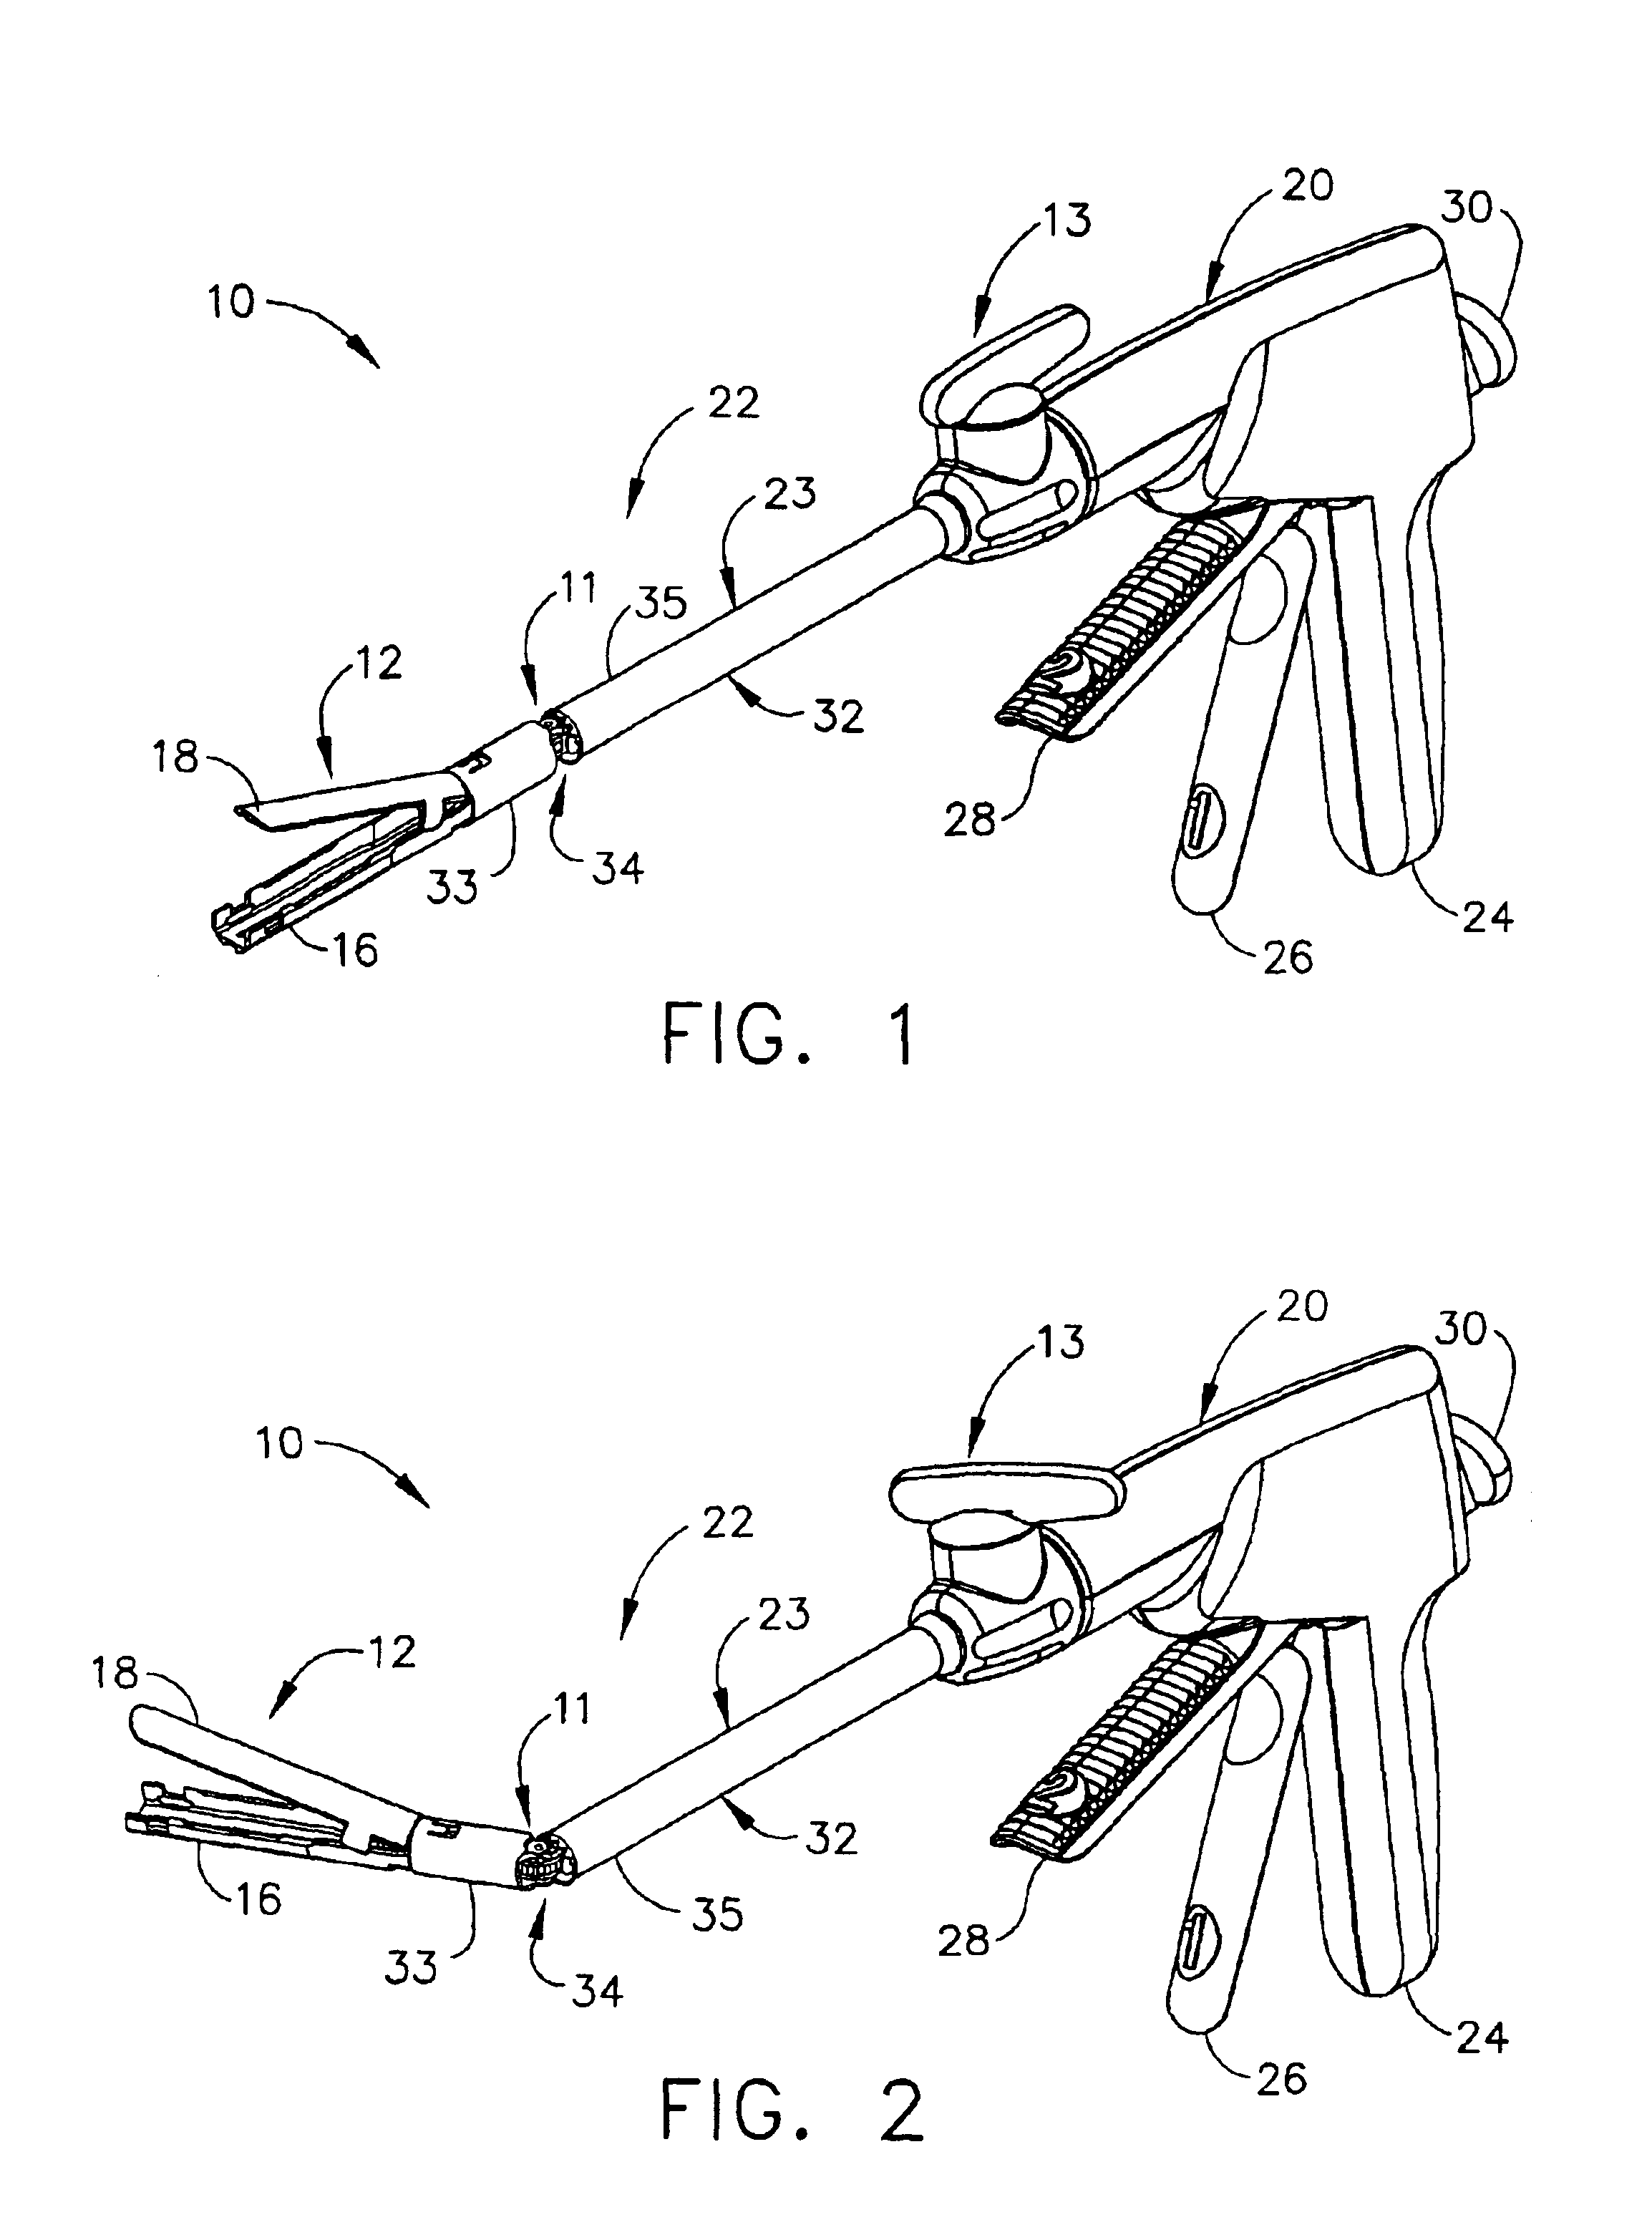 Surgical instrument with a lateral-moving articulation control